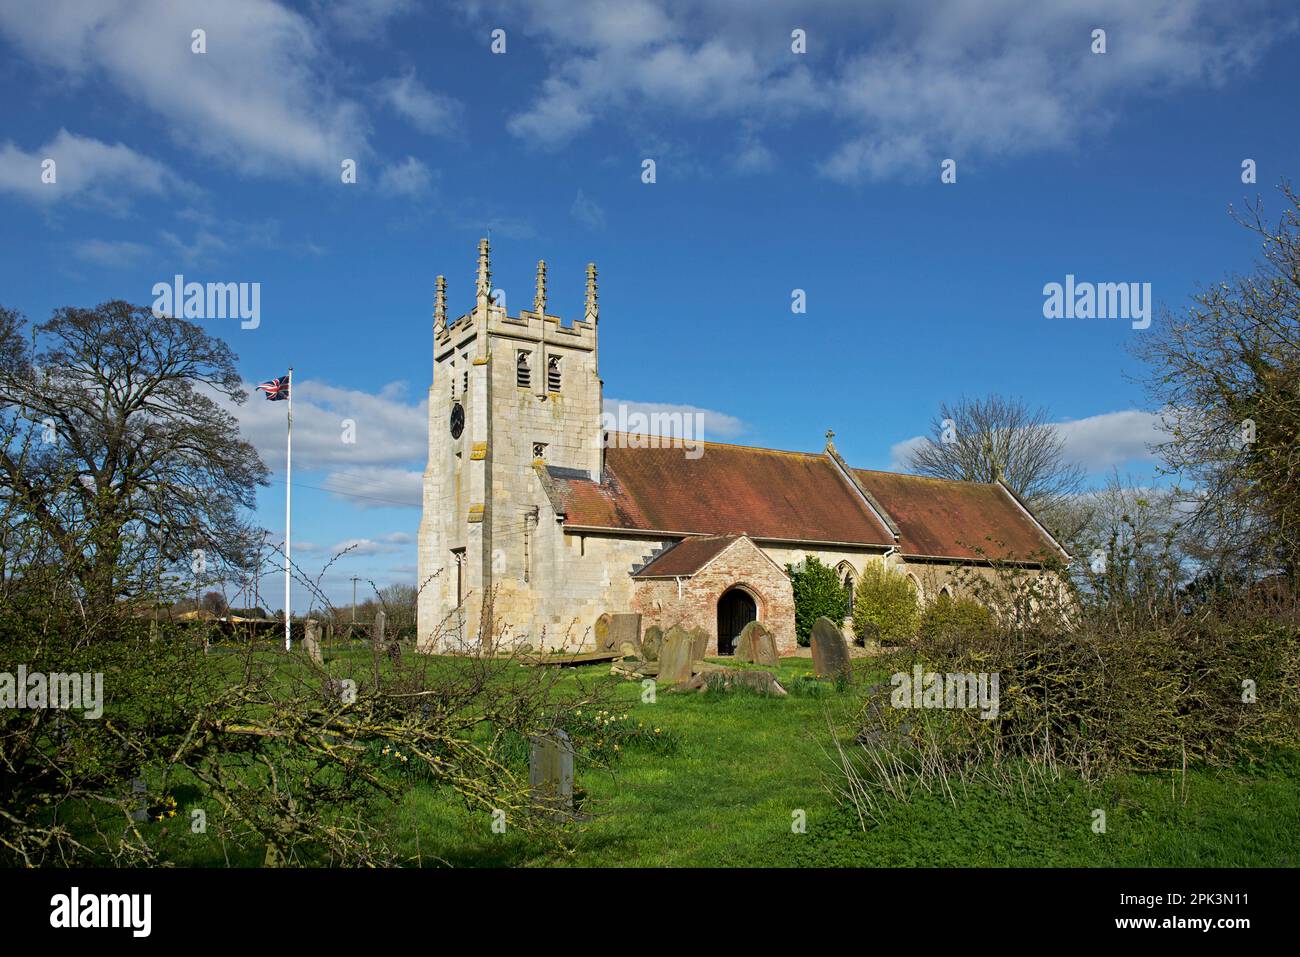 All Saints Church in the village of Routh, East Yorkshire, England UK Stock Photo